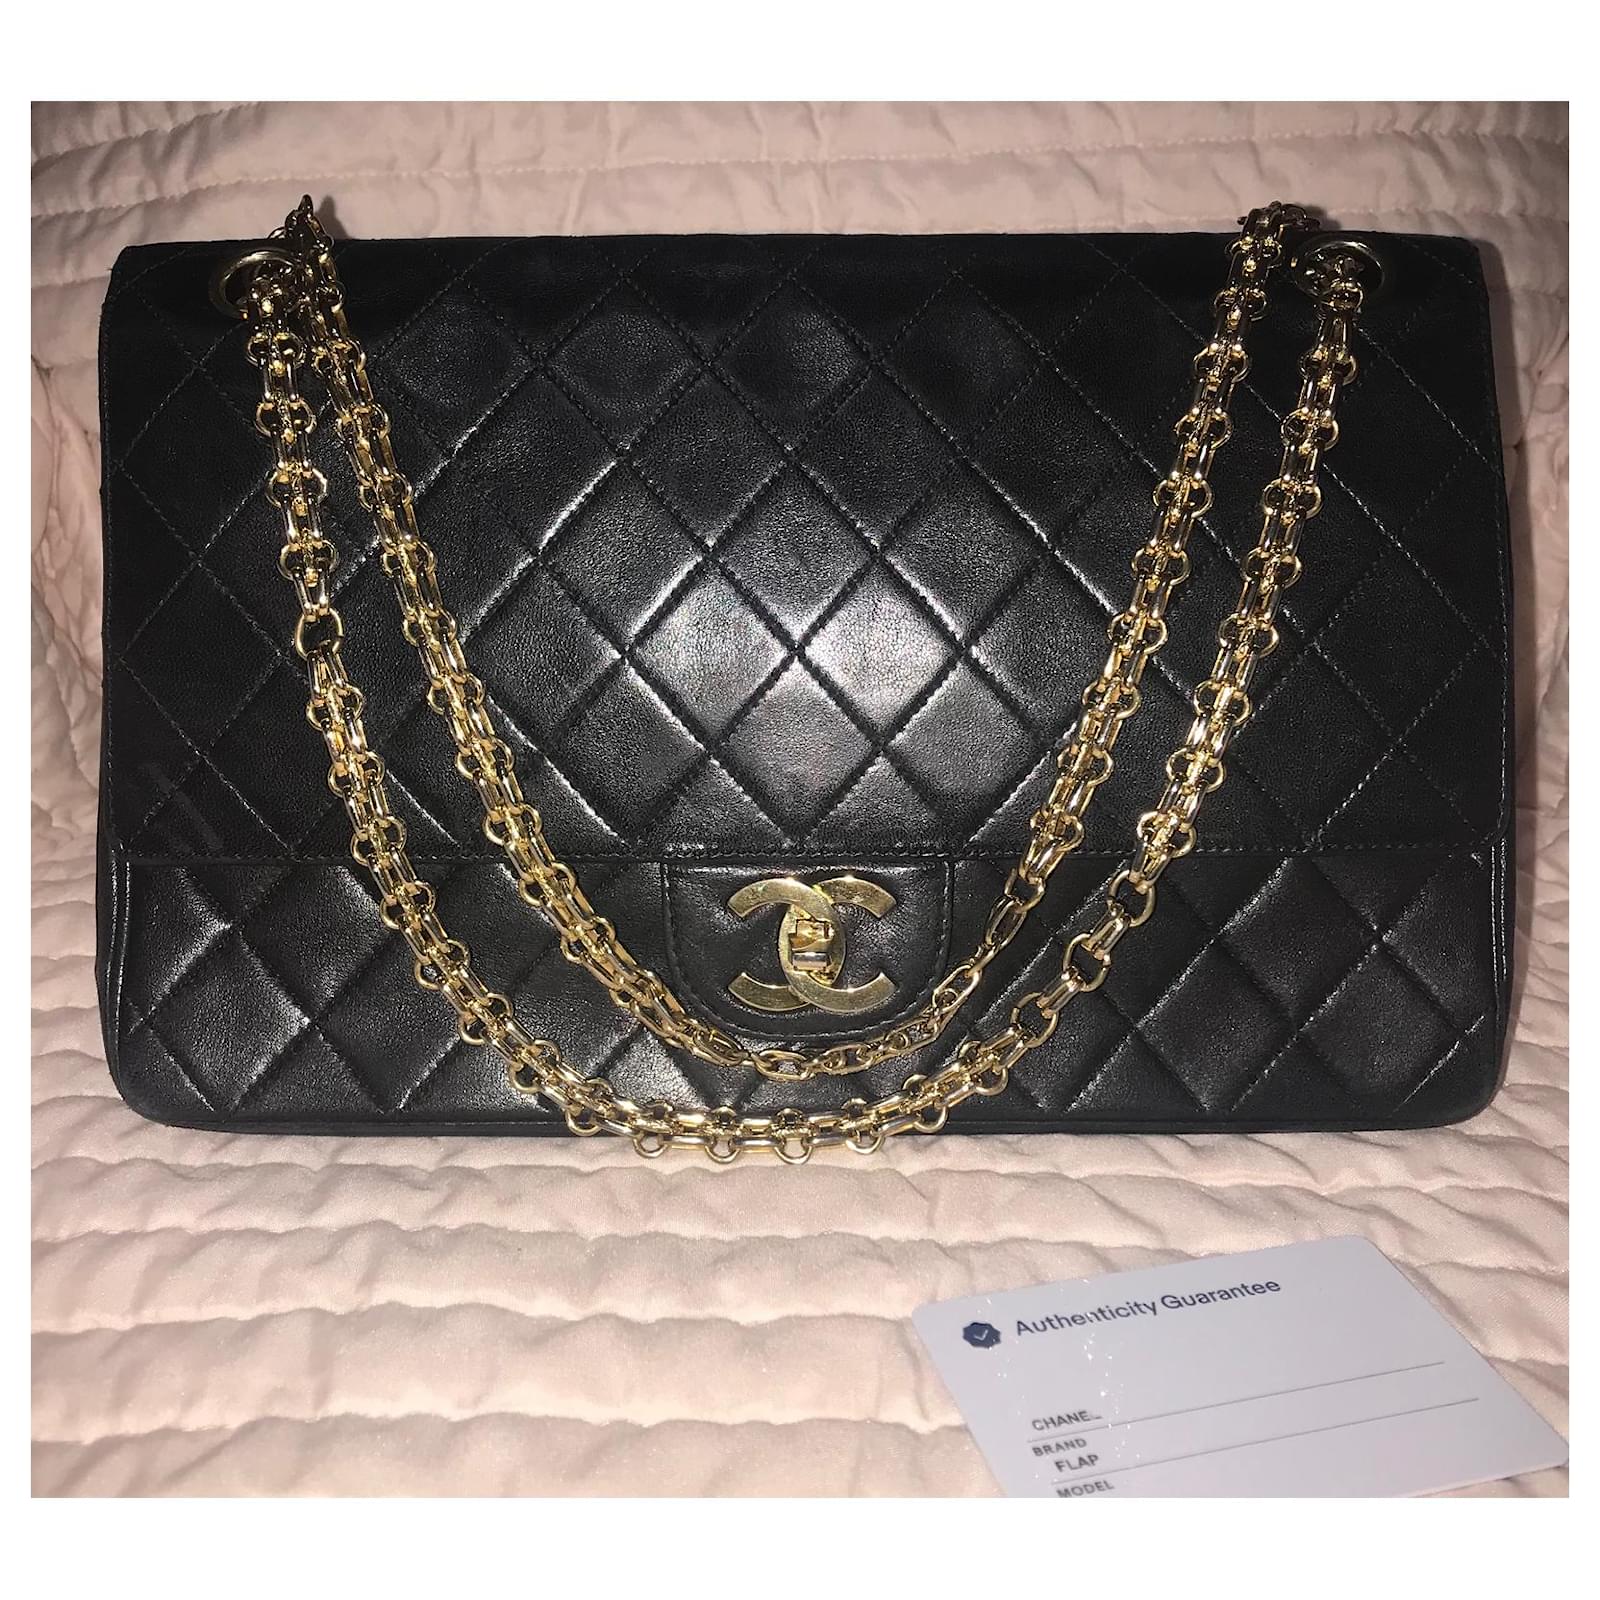 chanel bags clearance